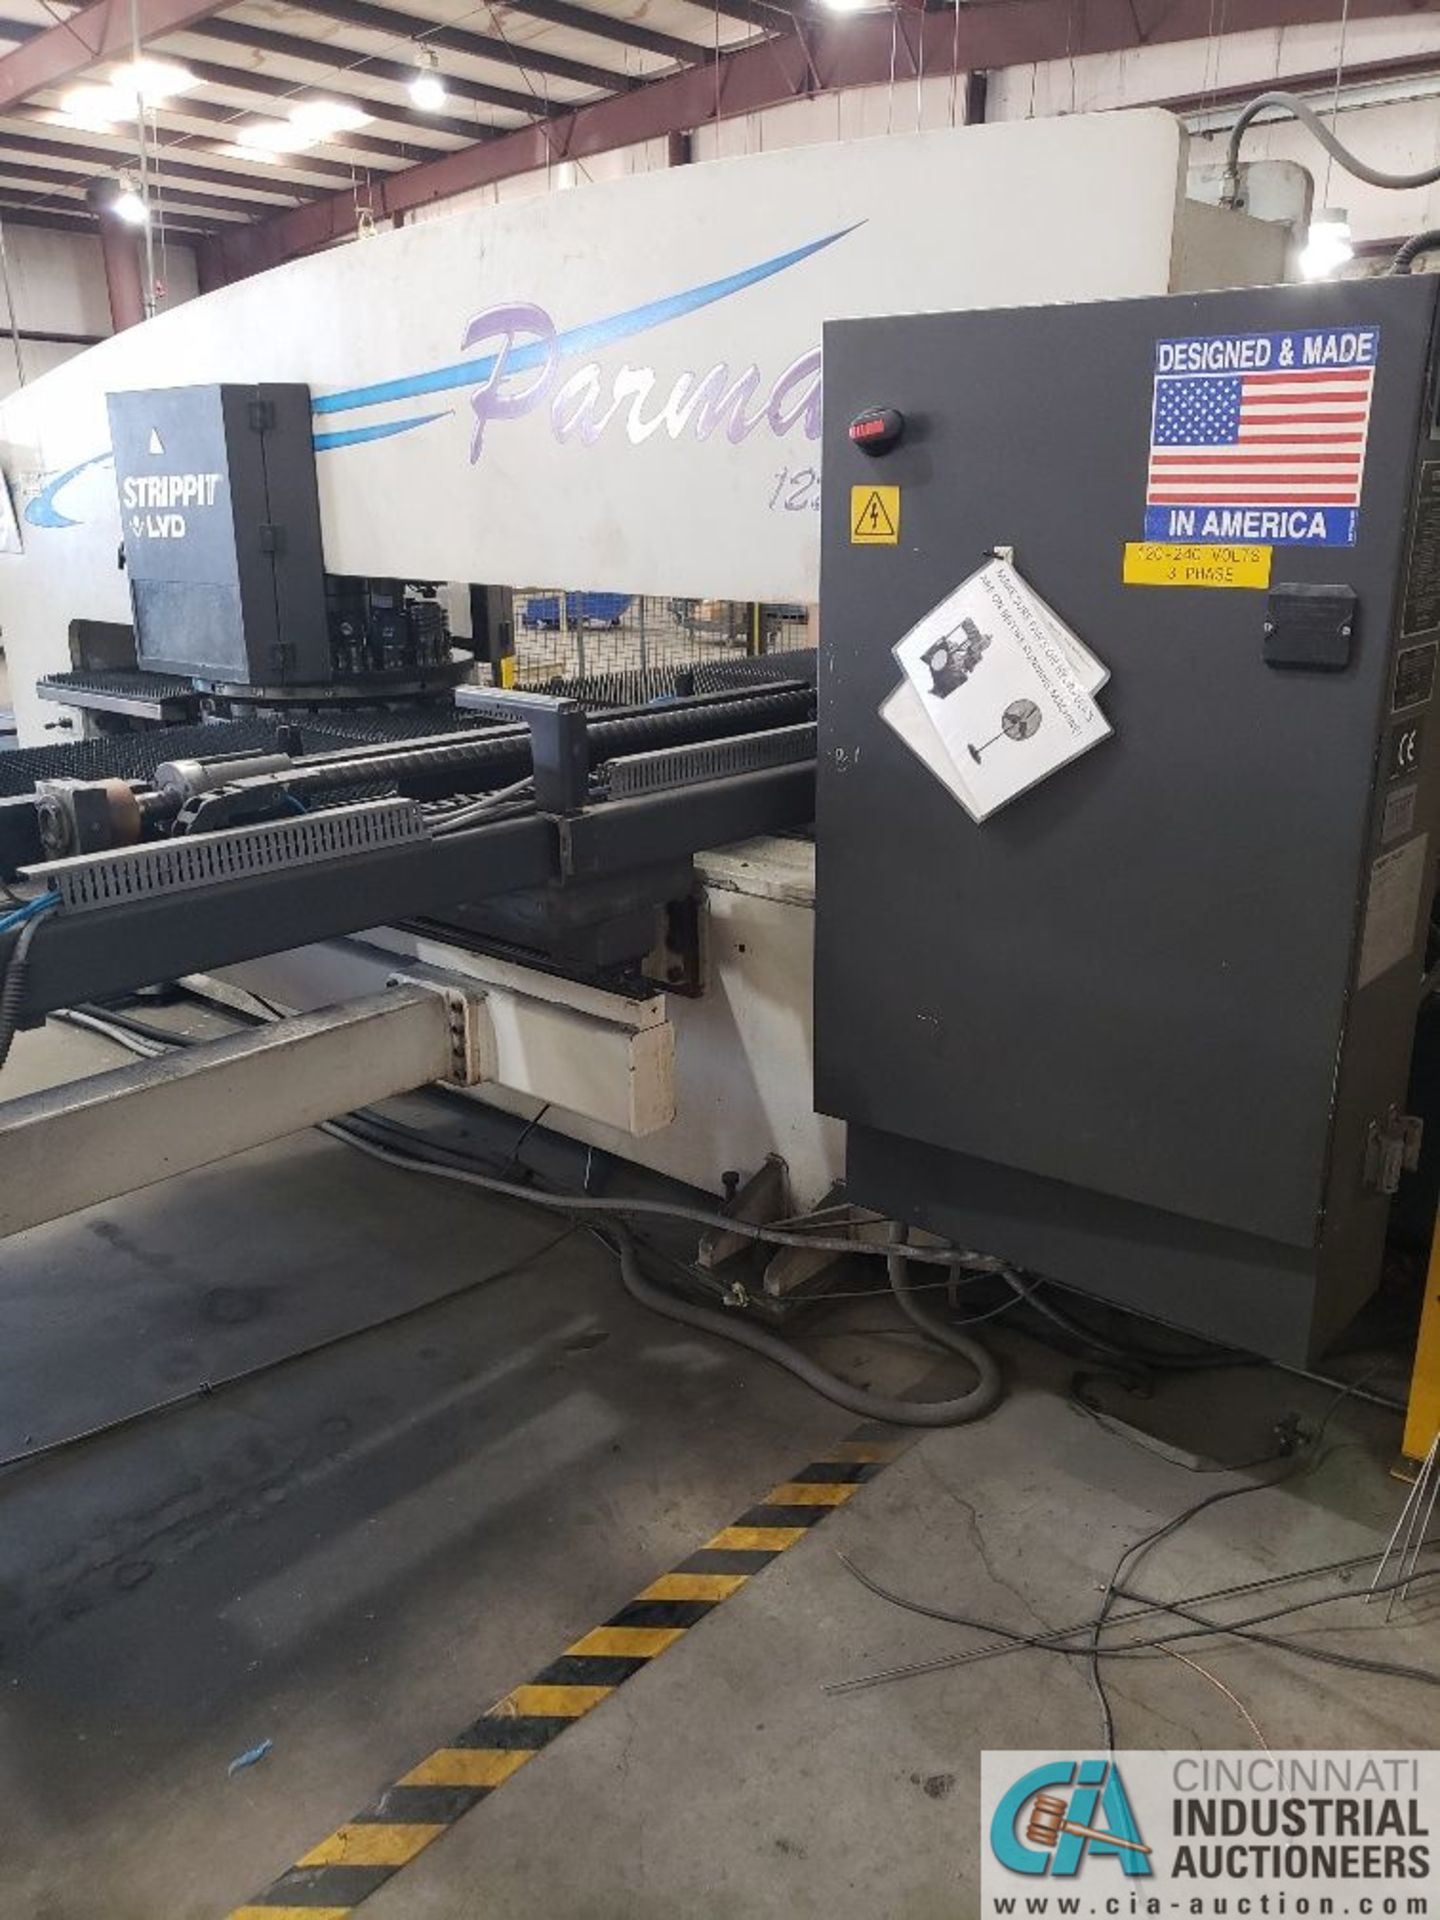 20 Ton Strippit Model Parma 1225 CNC Turret **Loading Fee Due the "ERRA" DFW Movers, $3,750.00** - Image 6 of 12